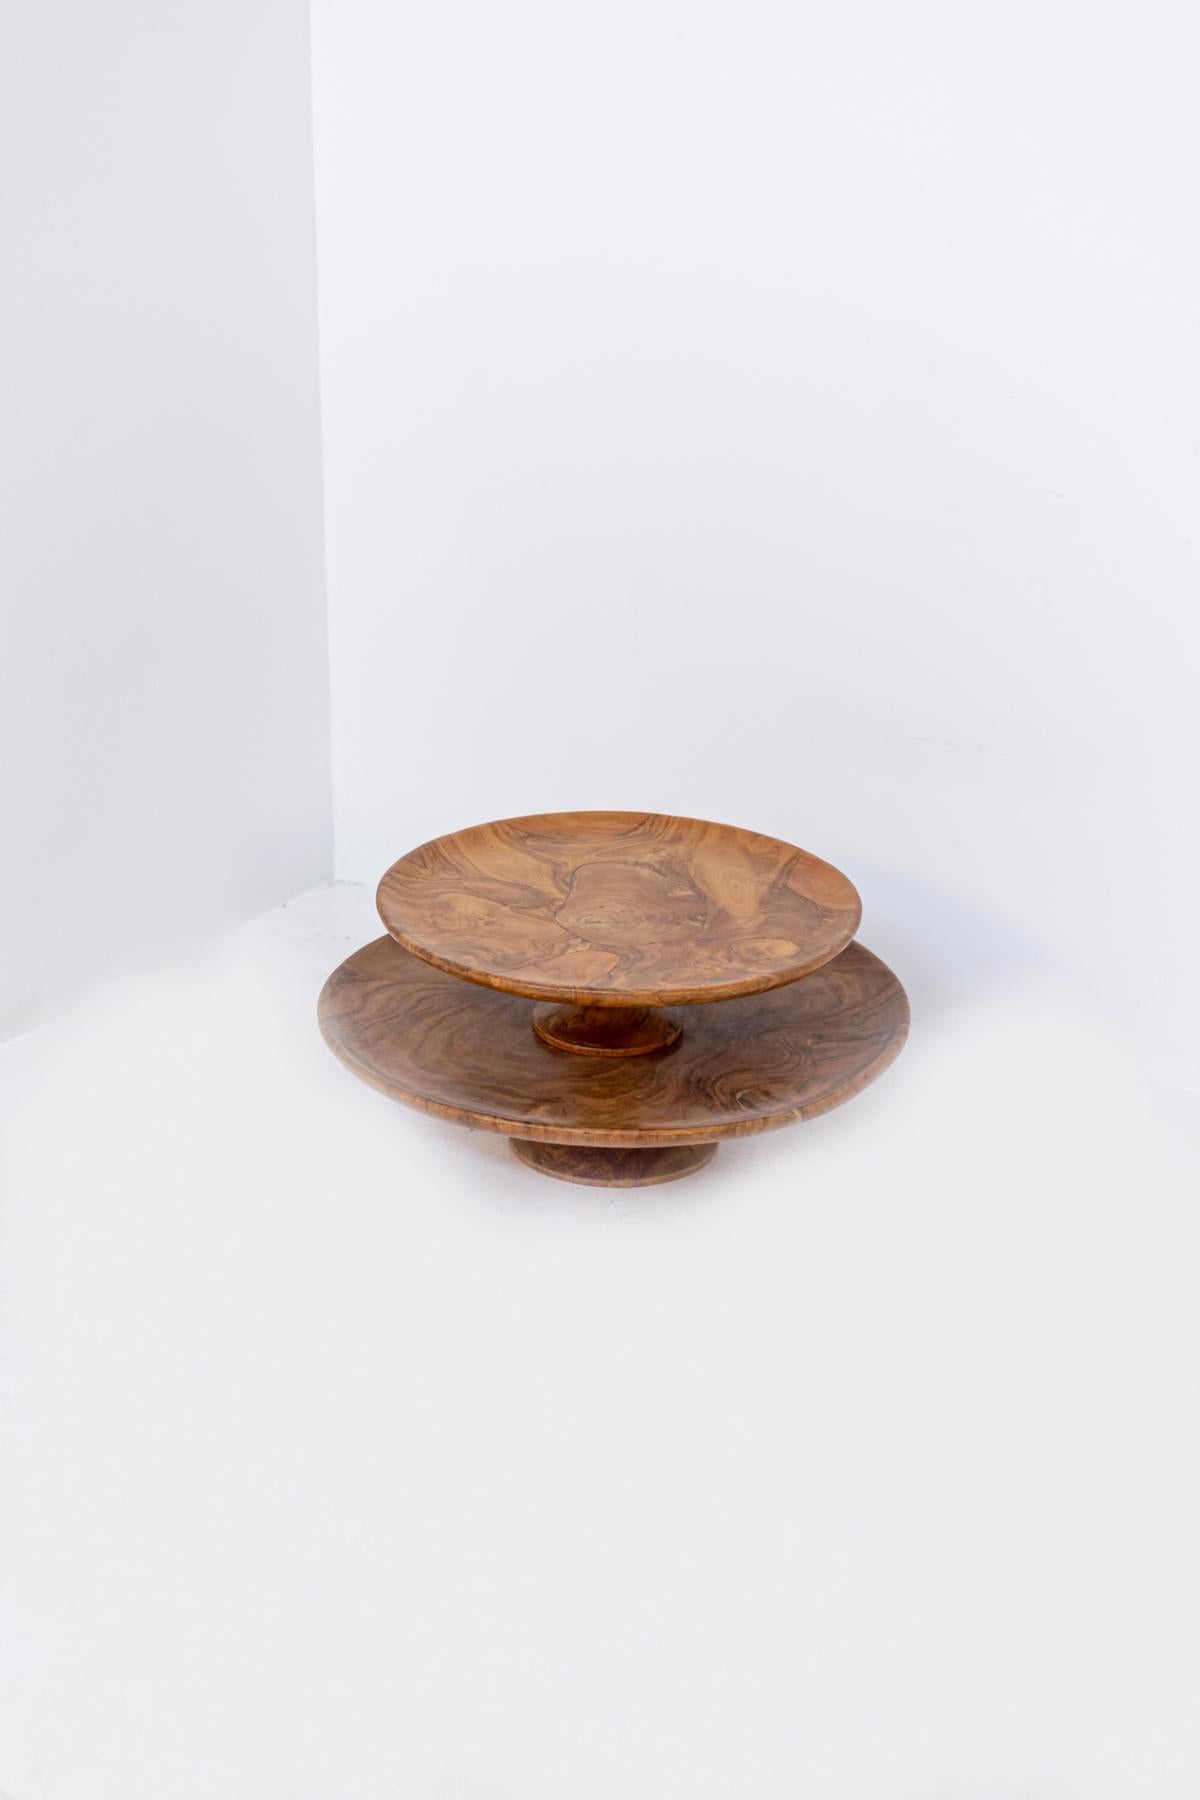 Beautiful pair of 21st century walnut sculptural centerpieces.
The round centerpieces are made of fine walnut burl, and feature beautiful wood grains. 
They are suitable for large rooms in a Classic rustic style but with a refined and sophisticated